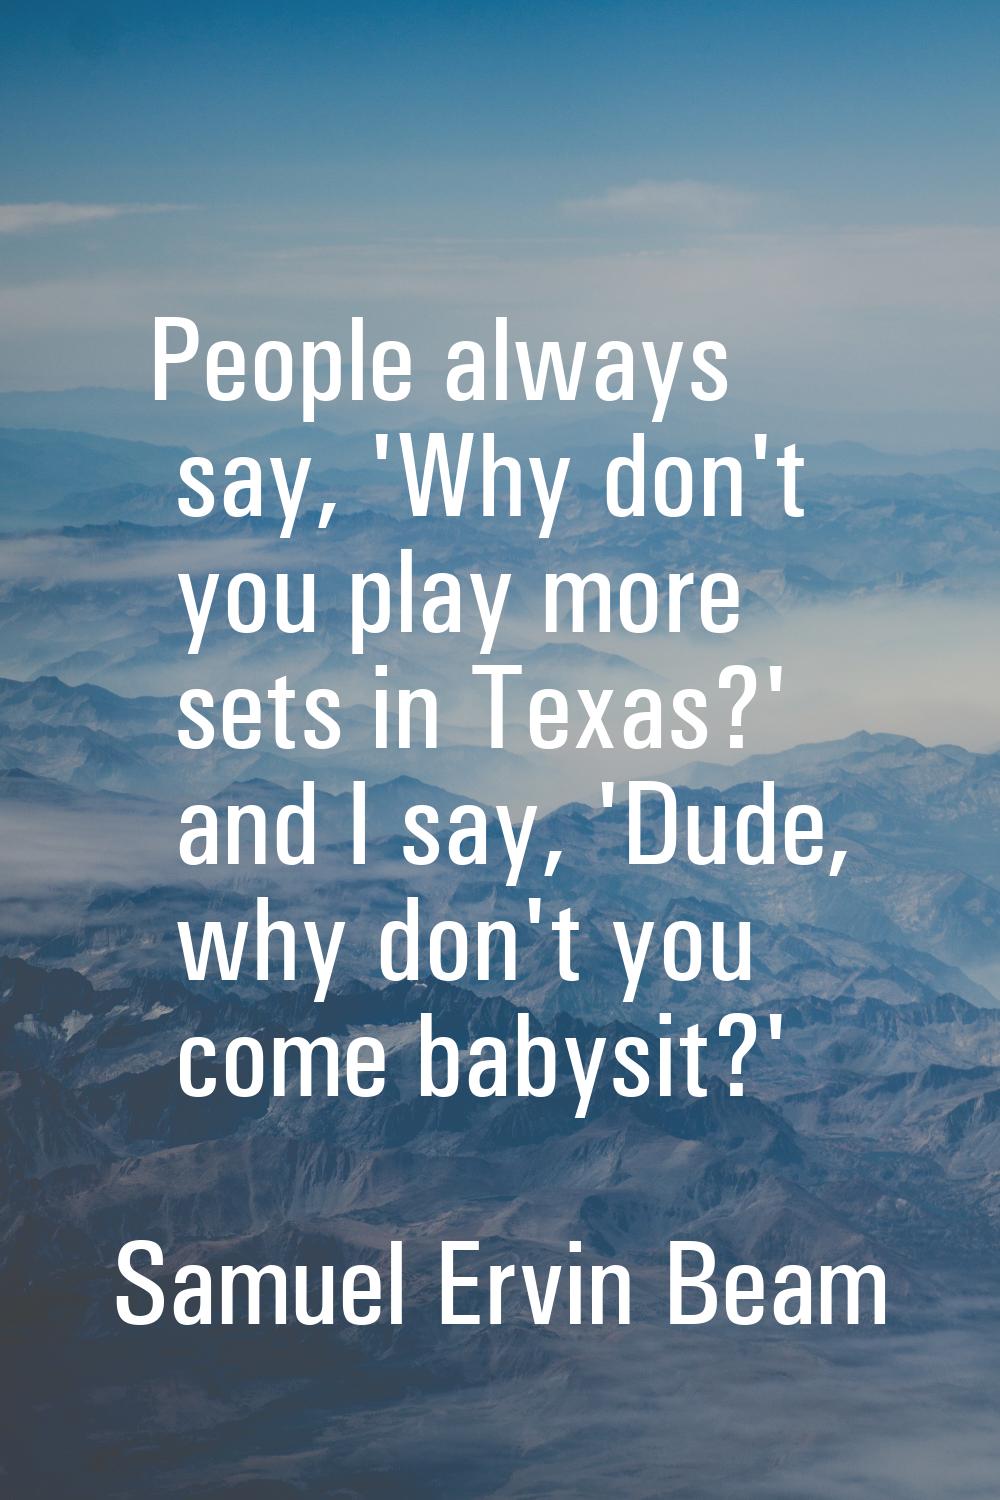 People always say, 'Why don't you play more sets in Texas?' and I say, 'Dude, why don't you come ba